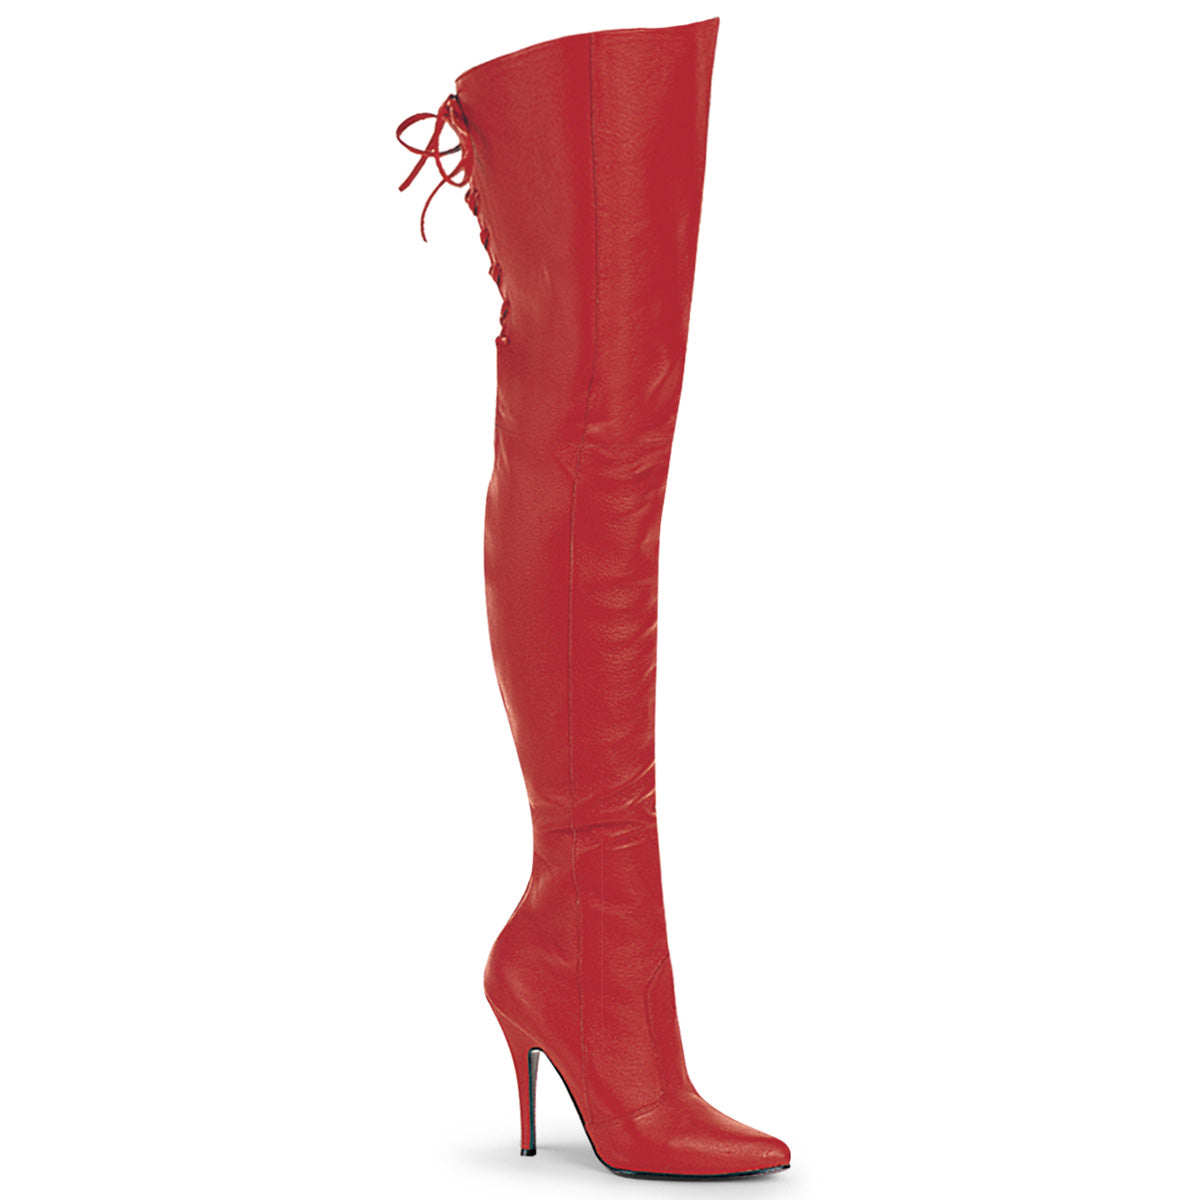 LEGEND-8899 Pleaser 5 Inch Heel Red Leather Thigh High Boots Fetish Footwear